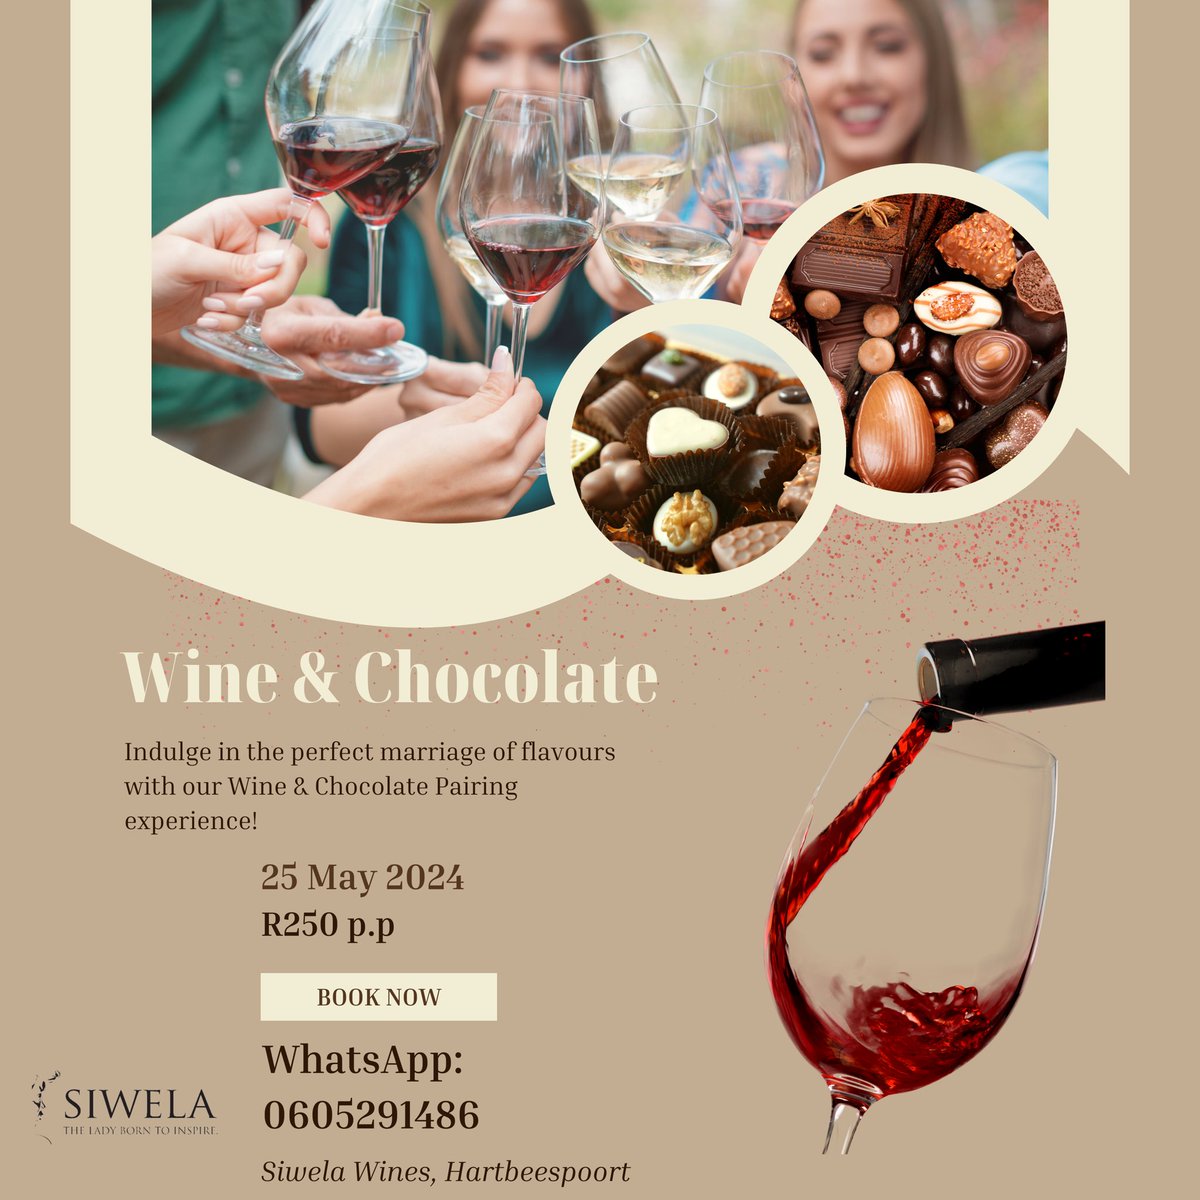 Sippin' wine, devourin' chocolate... It's just another day in paradise! Experience the divine pleasure of Siwela Wine’s Chocolate and Wine Pairing experience- trust me, it's a match made in heaven! #WineAndChocolate #SiwelaWines #HeavenlyPairing #WineTime #ChocolateLovers